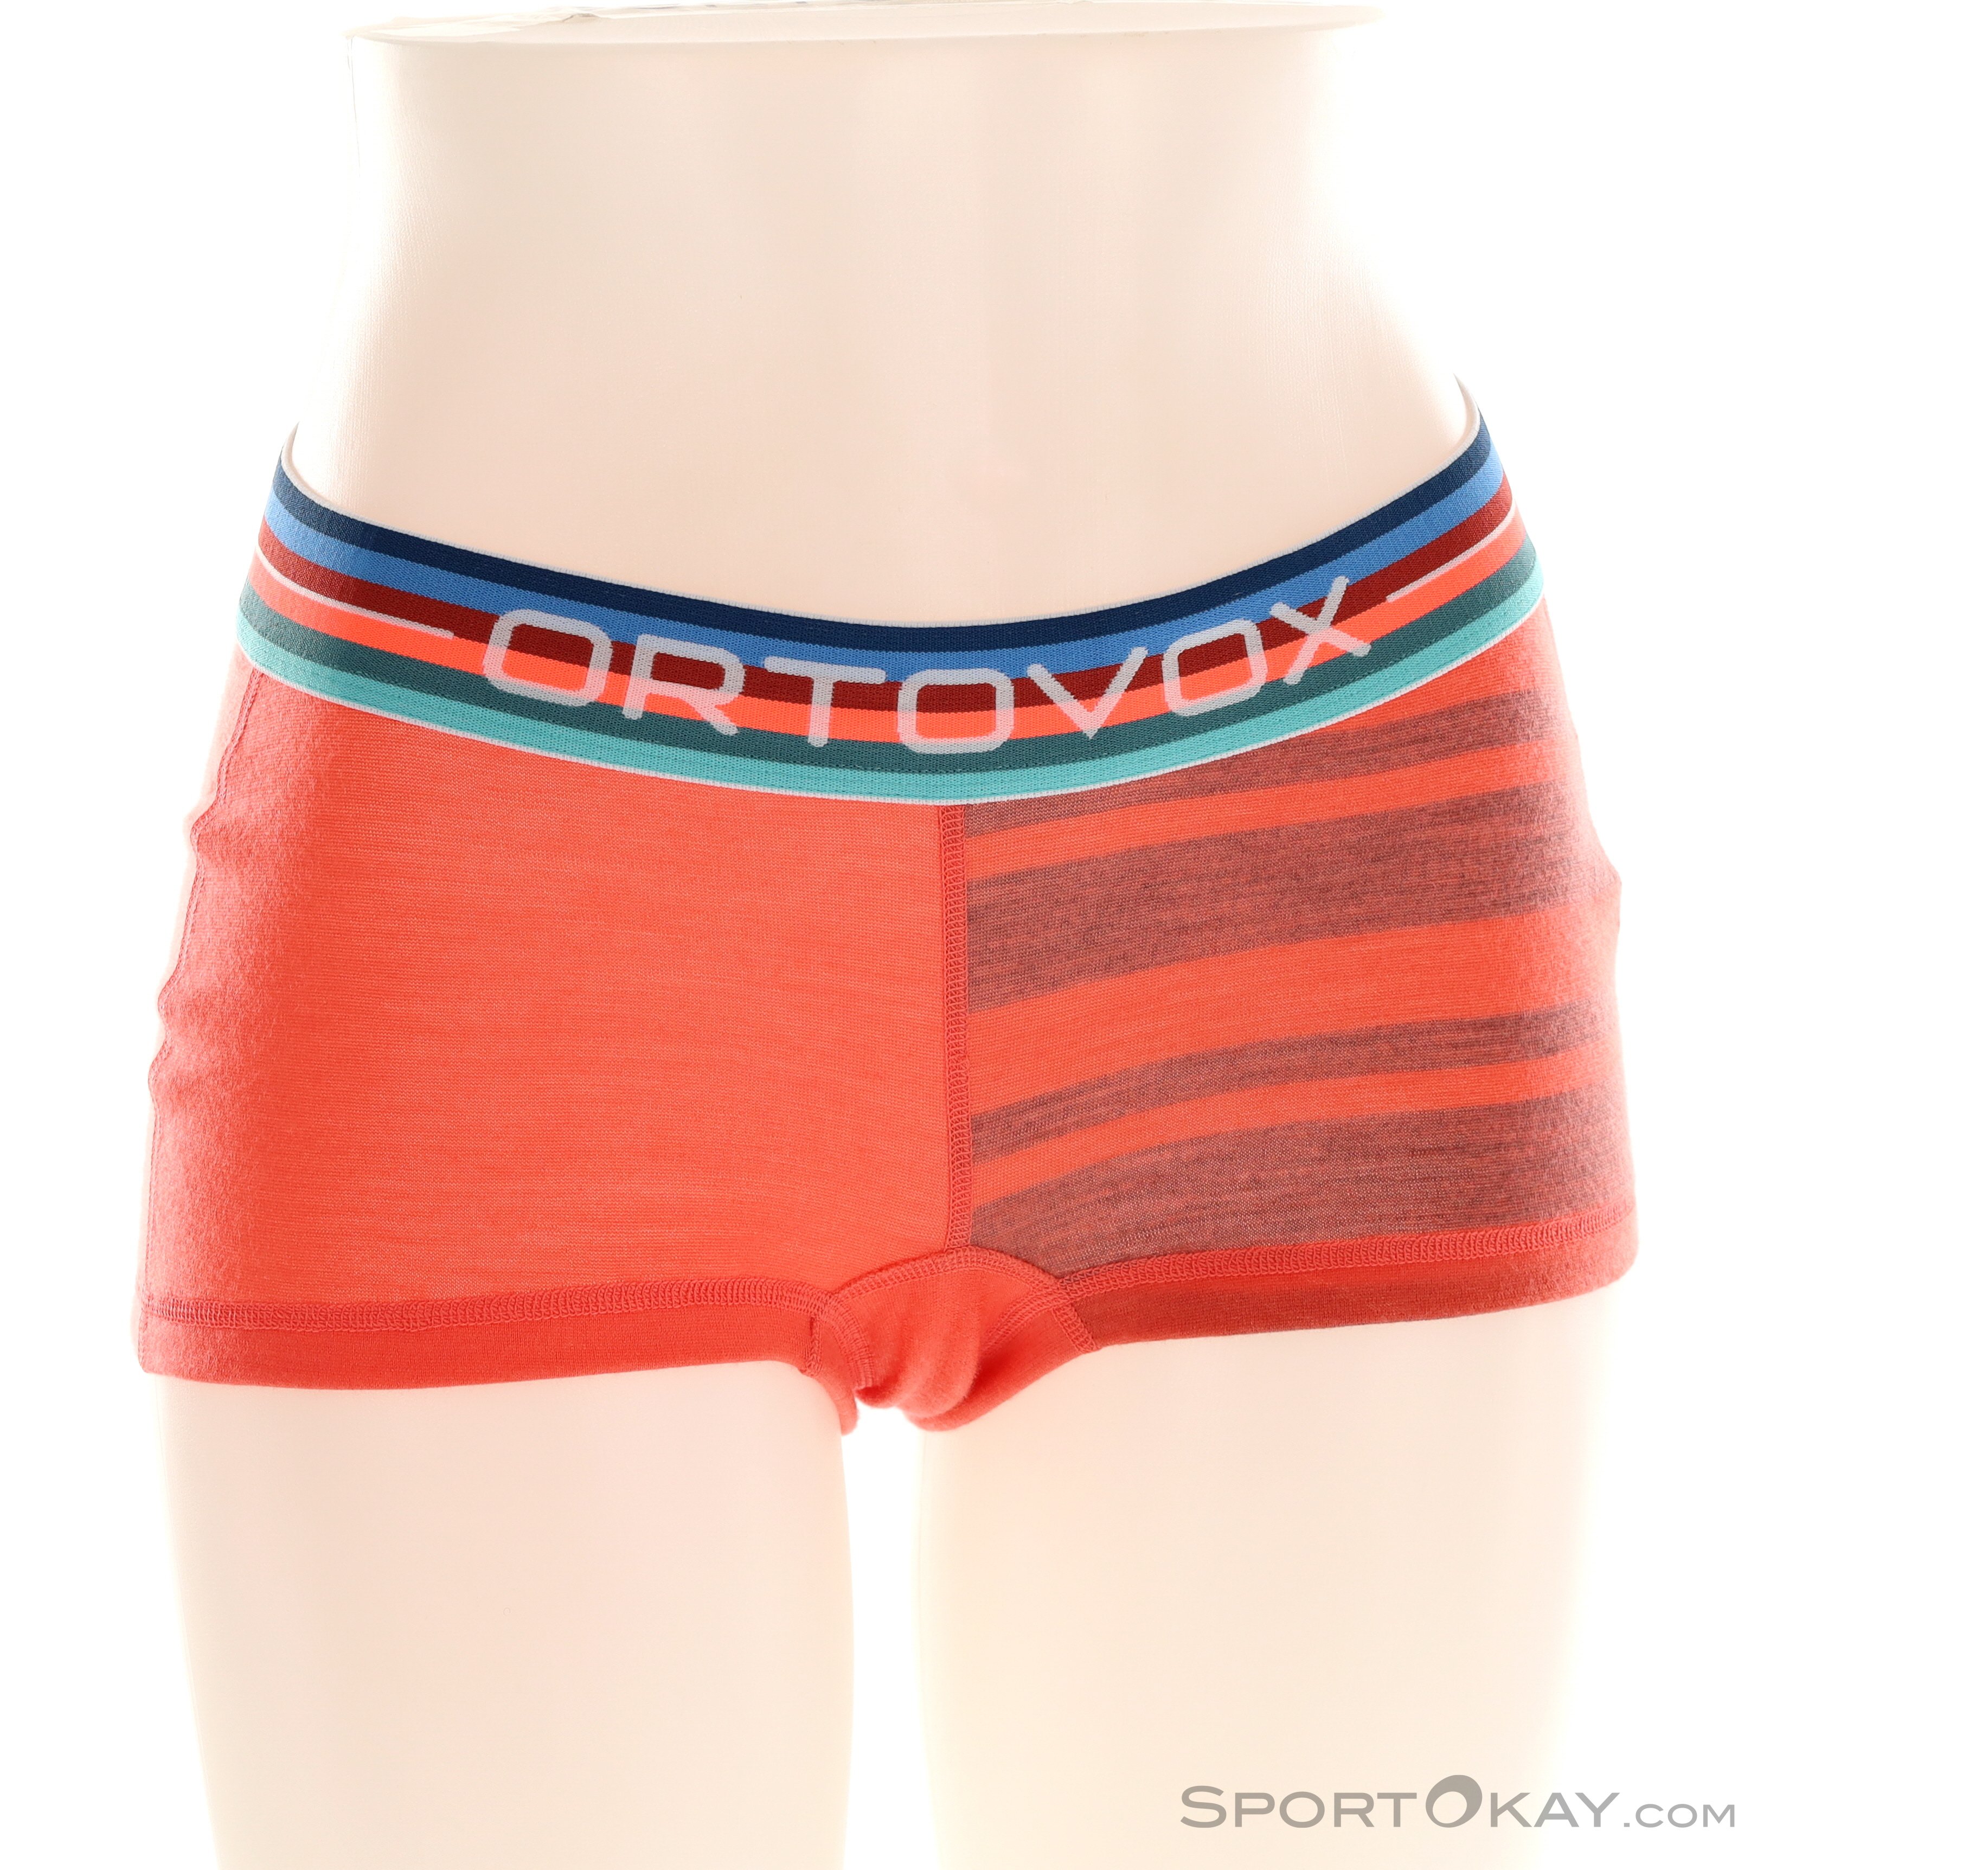 Ortovox Rock'n'Wool Sport Top Womens Sports Bra - Functional Clothing -  Outdoor Clothing - Outdoor - All